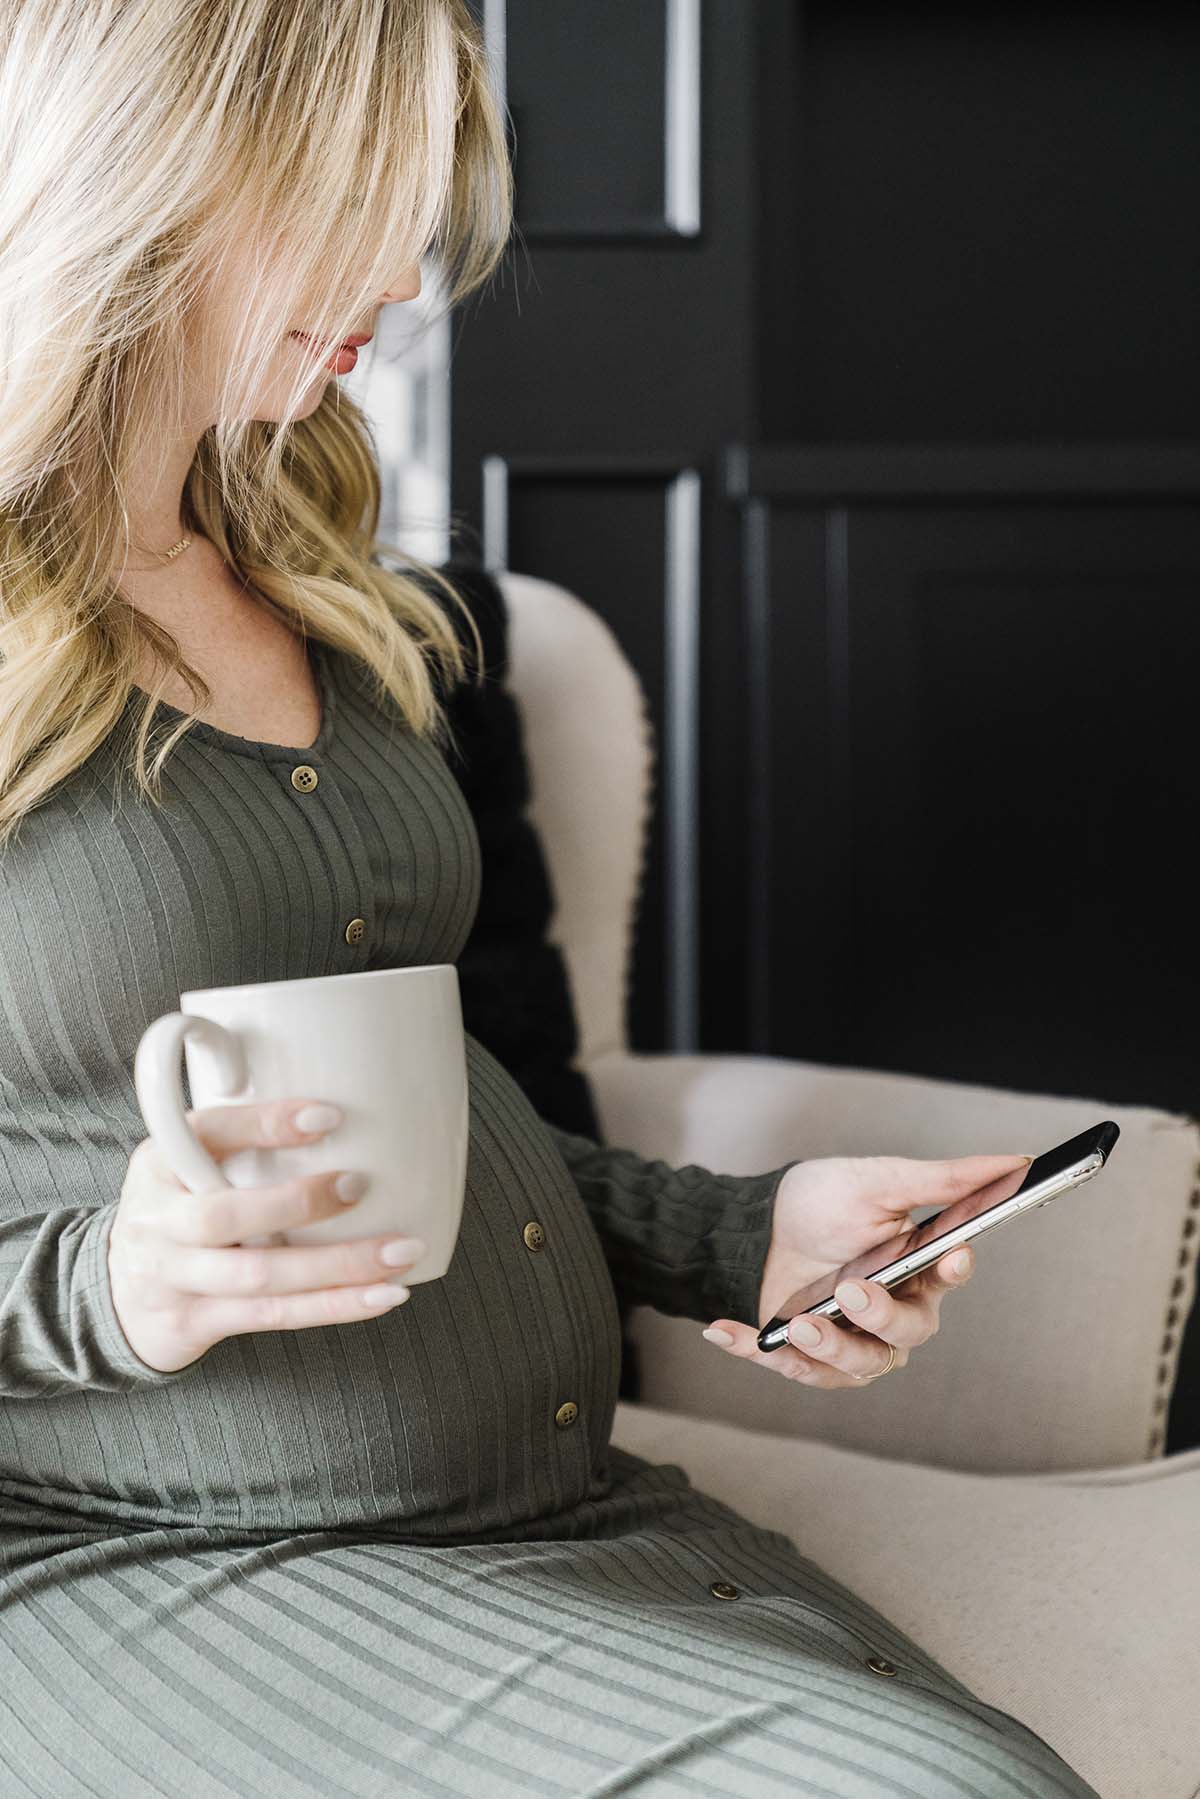 We're often being told what we should and shouldn't eat during pregnancy, but what about helping to satisfy those crazy full on cravings that you get? These foods will help you satisfy those cravings without going into full-blown cravings rampage.